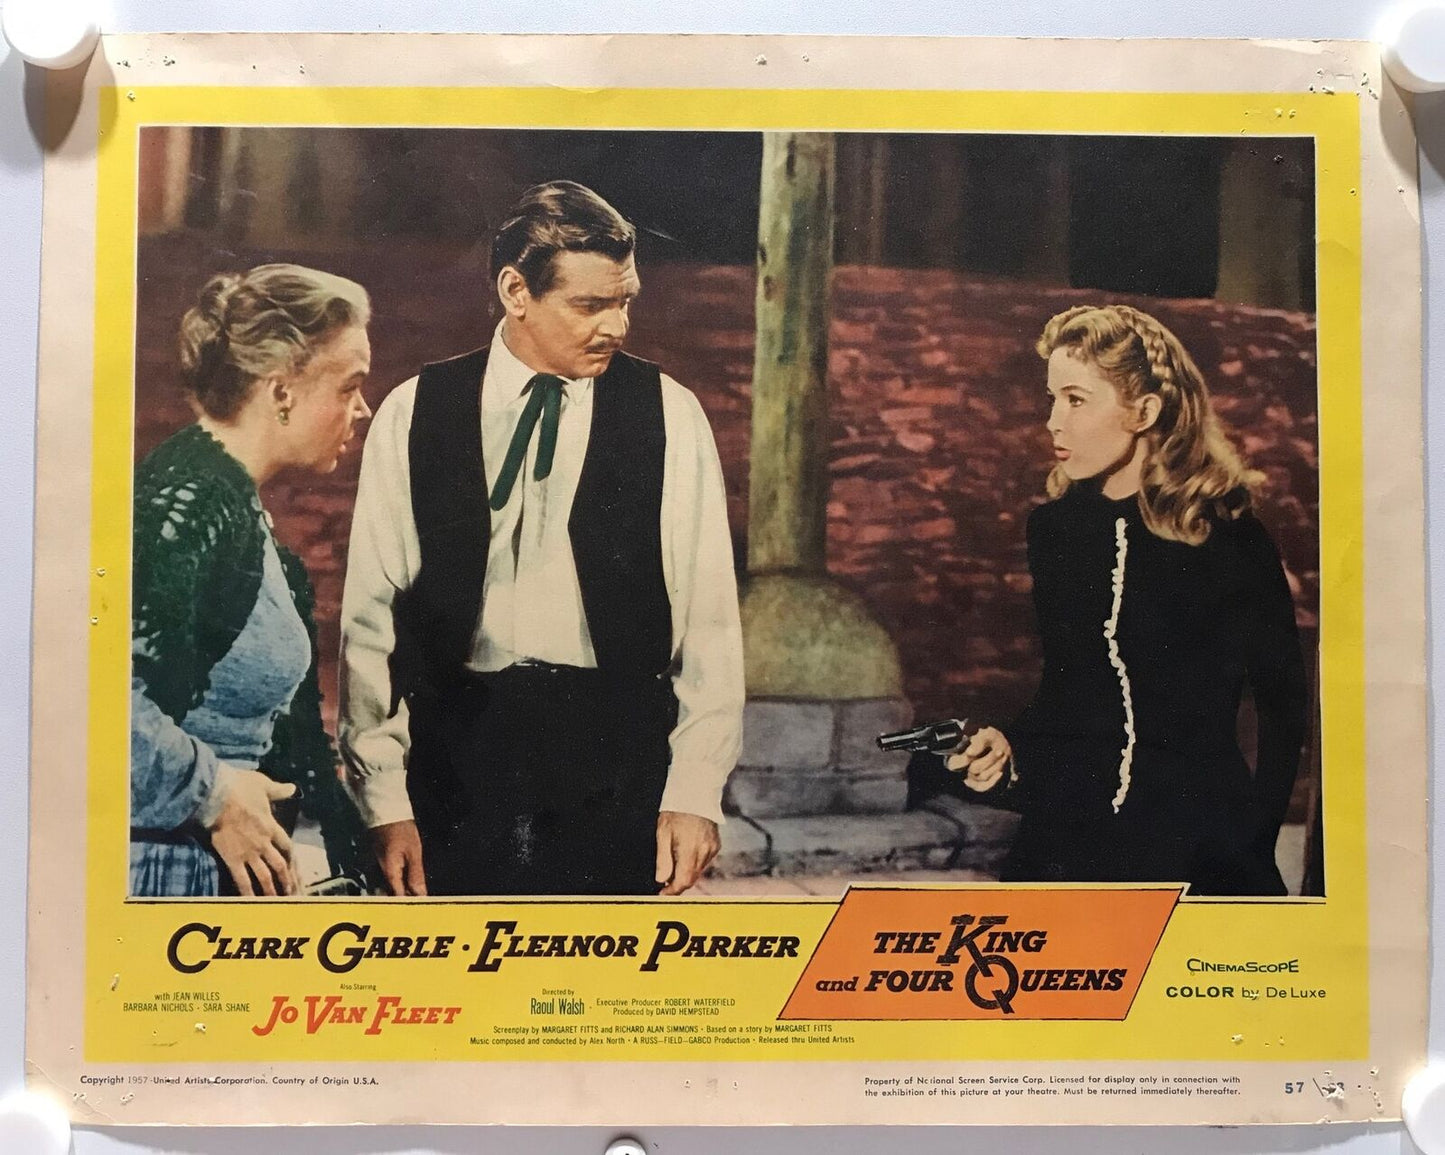 ORIGINAL LOBBY CARD - THE KING AND FOUR QUEENS -1957 - title card